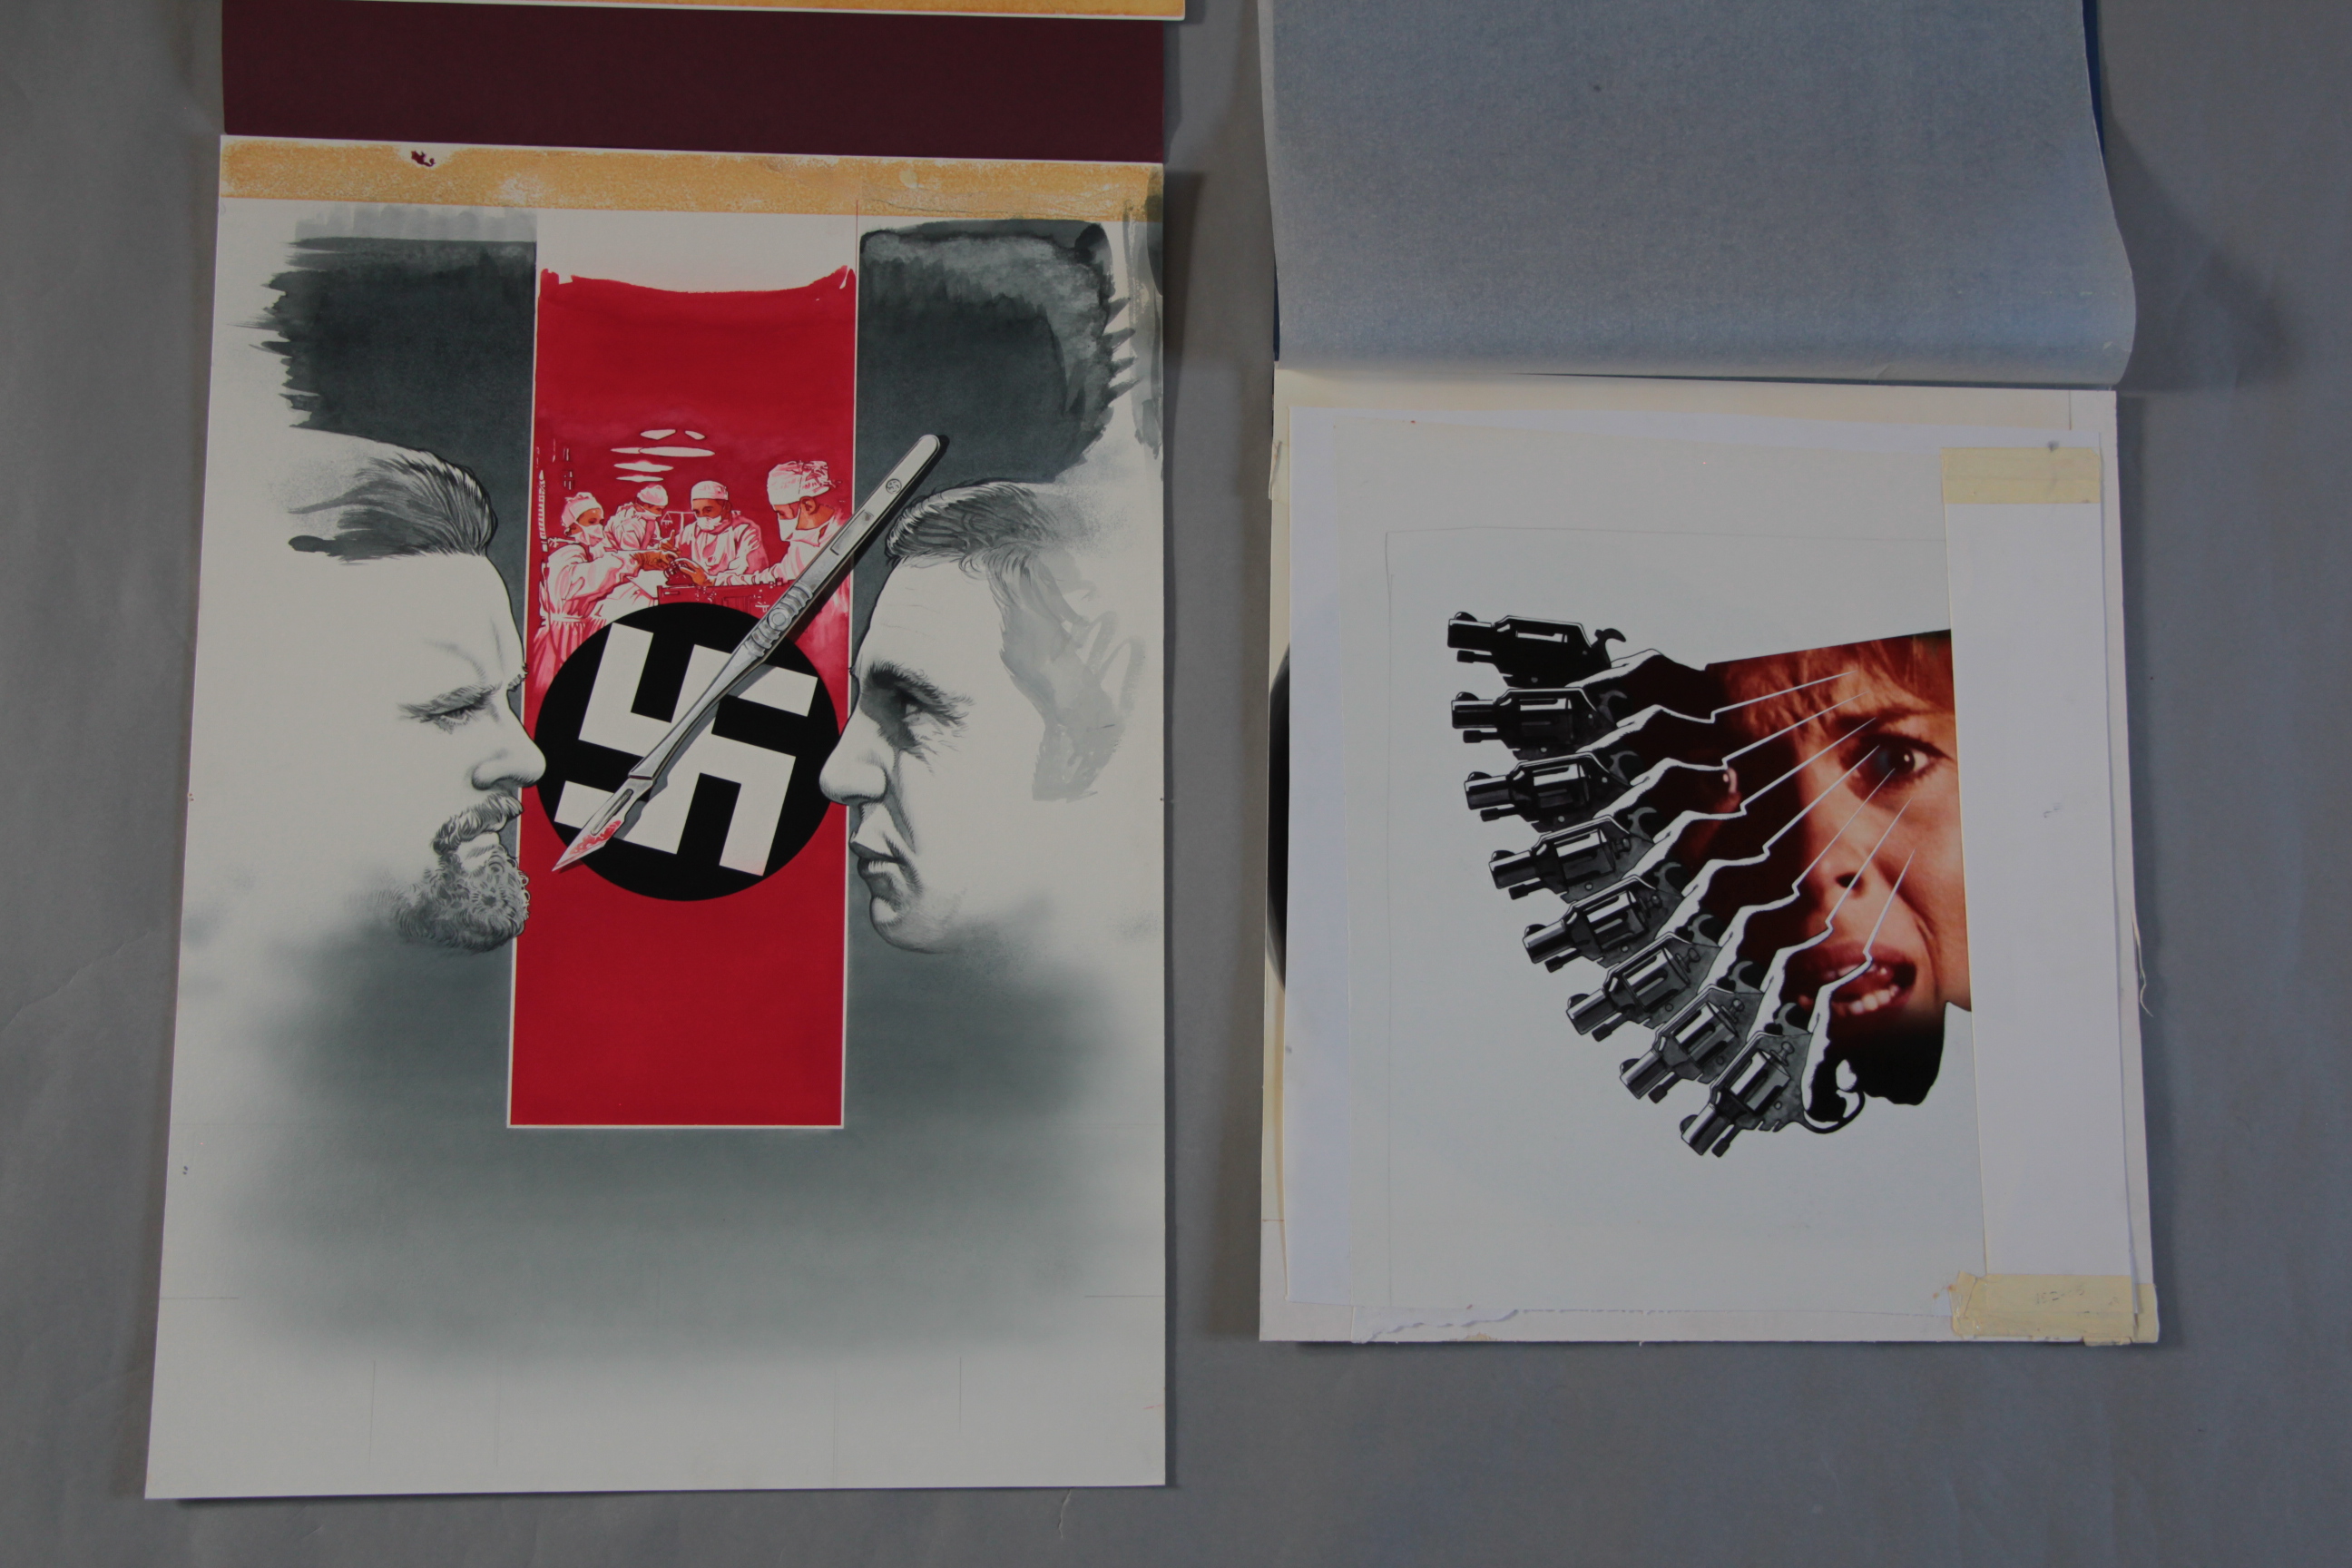 Vic Fair Original art for the Nazi film picturing the swastika, a hospital scene and a scalpel - Image 2 of 3